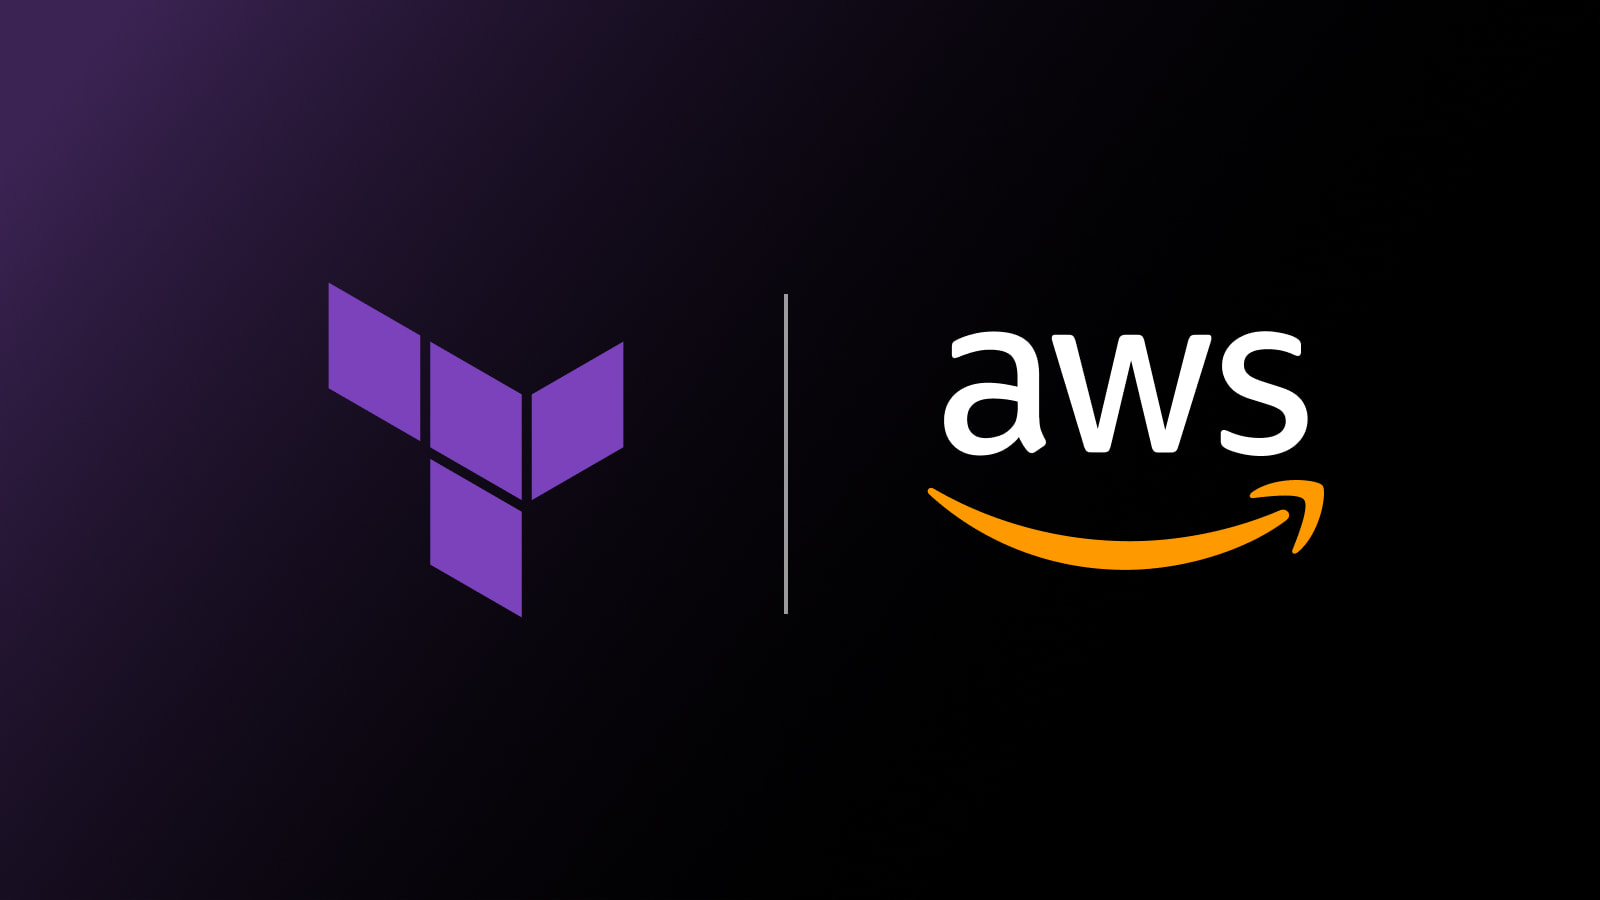 AWS and HashiCorp's Journey to 1 Billion Terraform AWS Provider Downloads